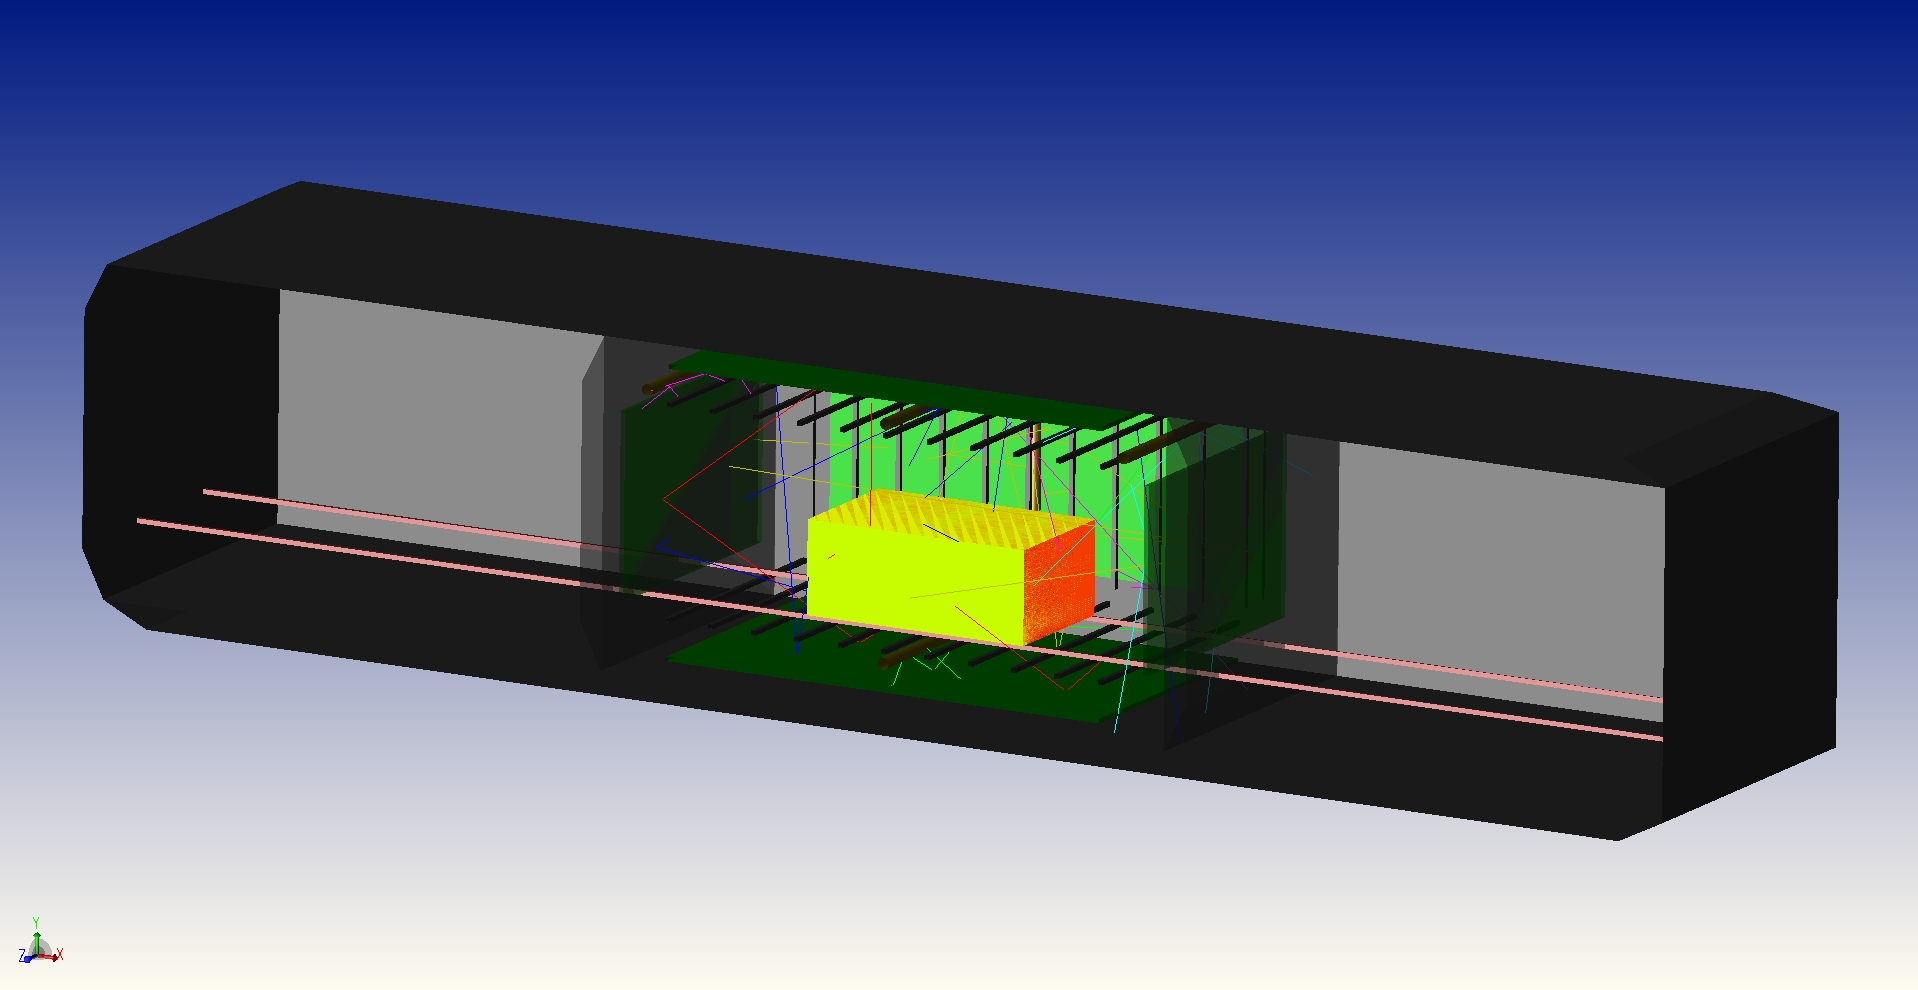 Simulation of a parcel lock with UV light for disinfection of parcel surfaces